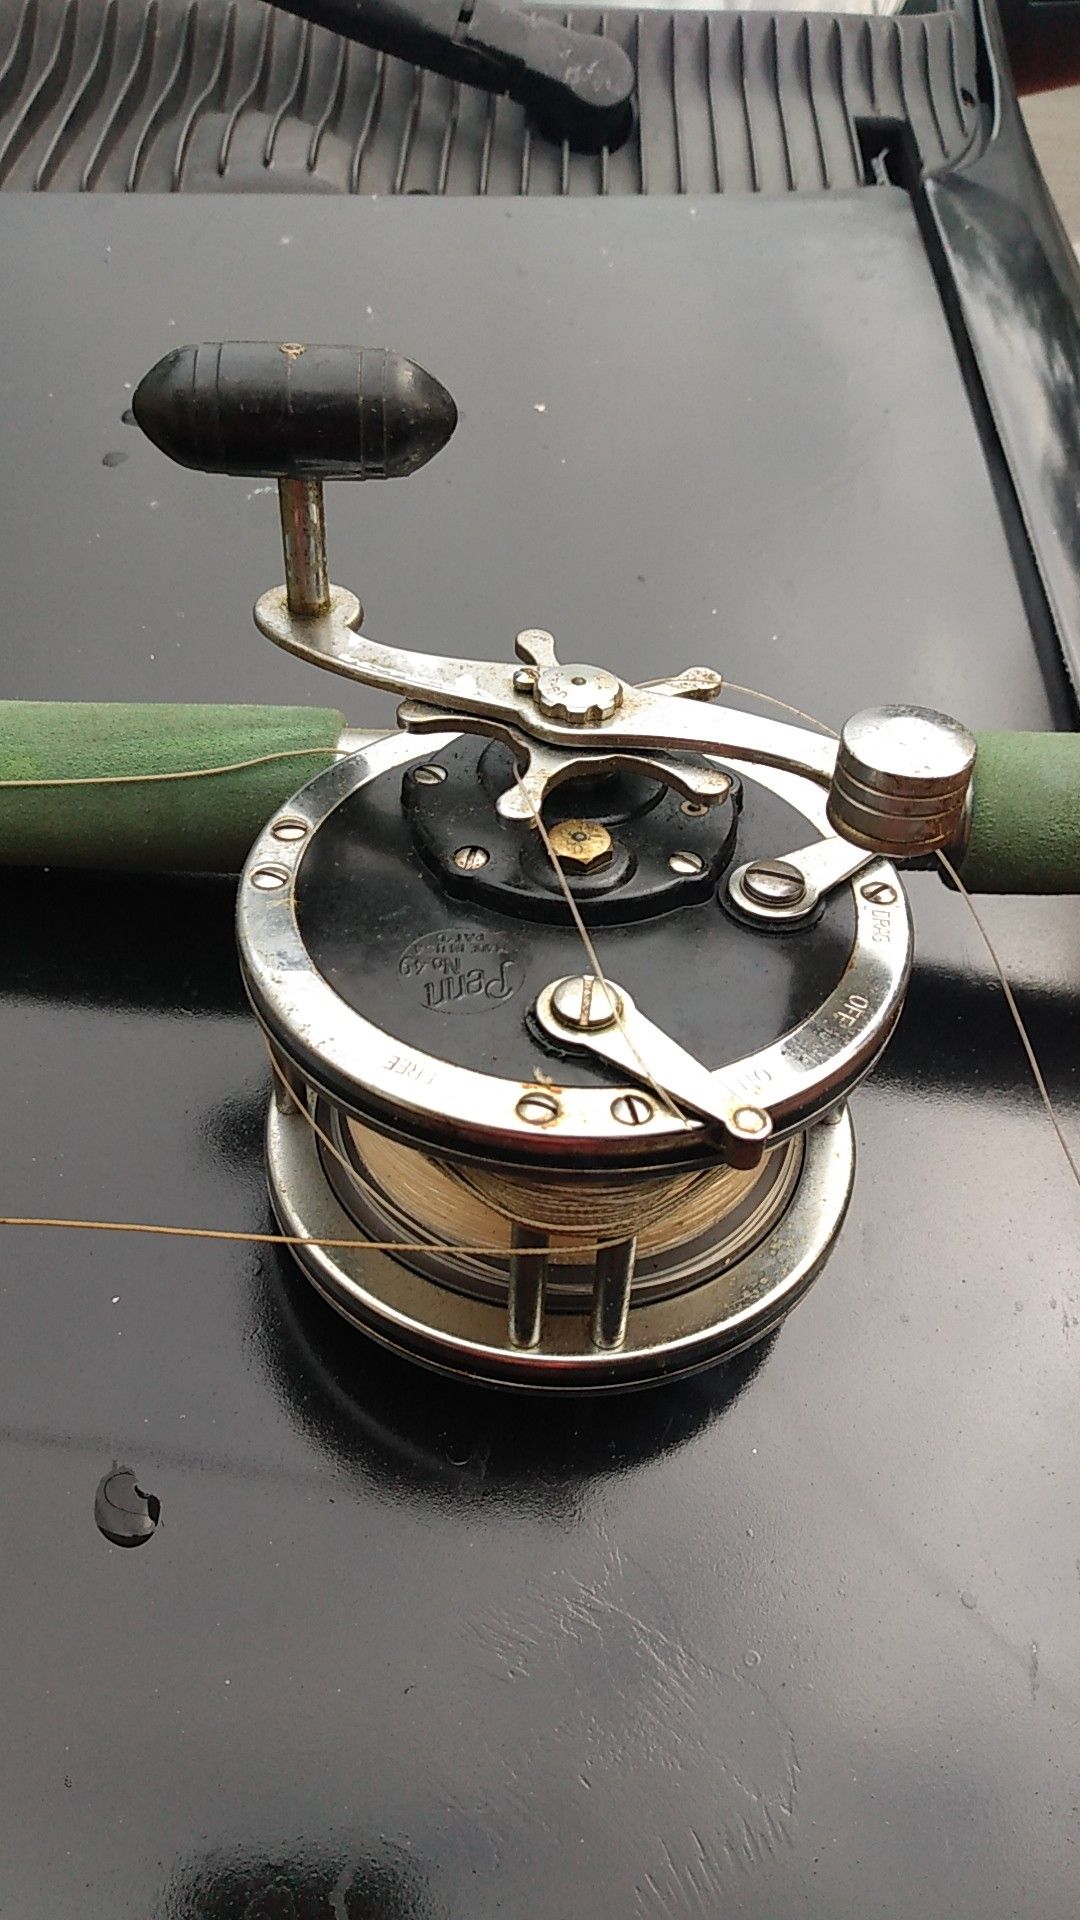 Deep sea reel Penn number 49 made in the USA